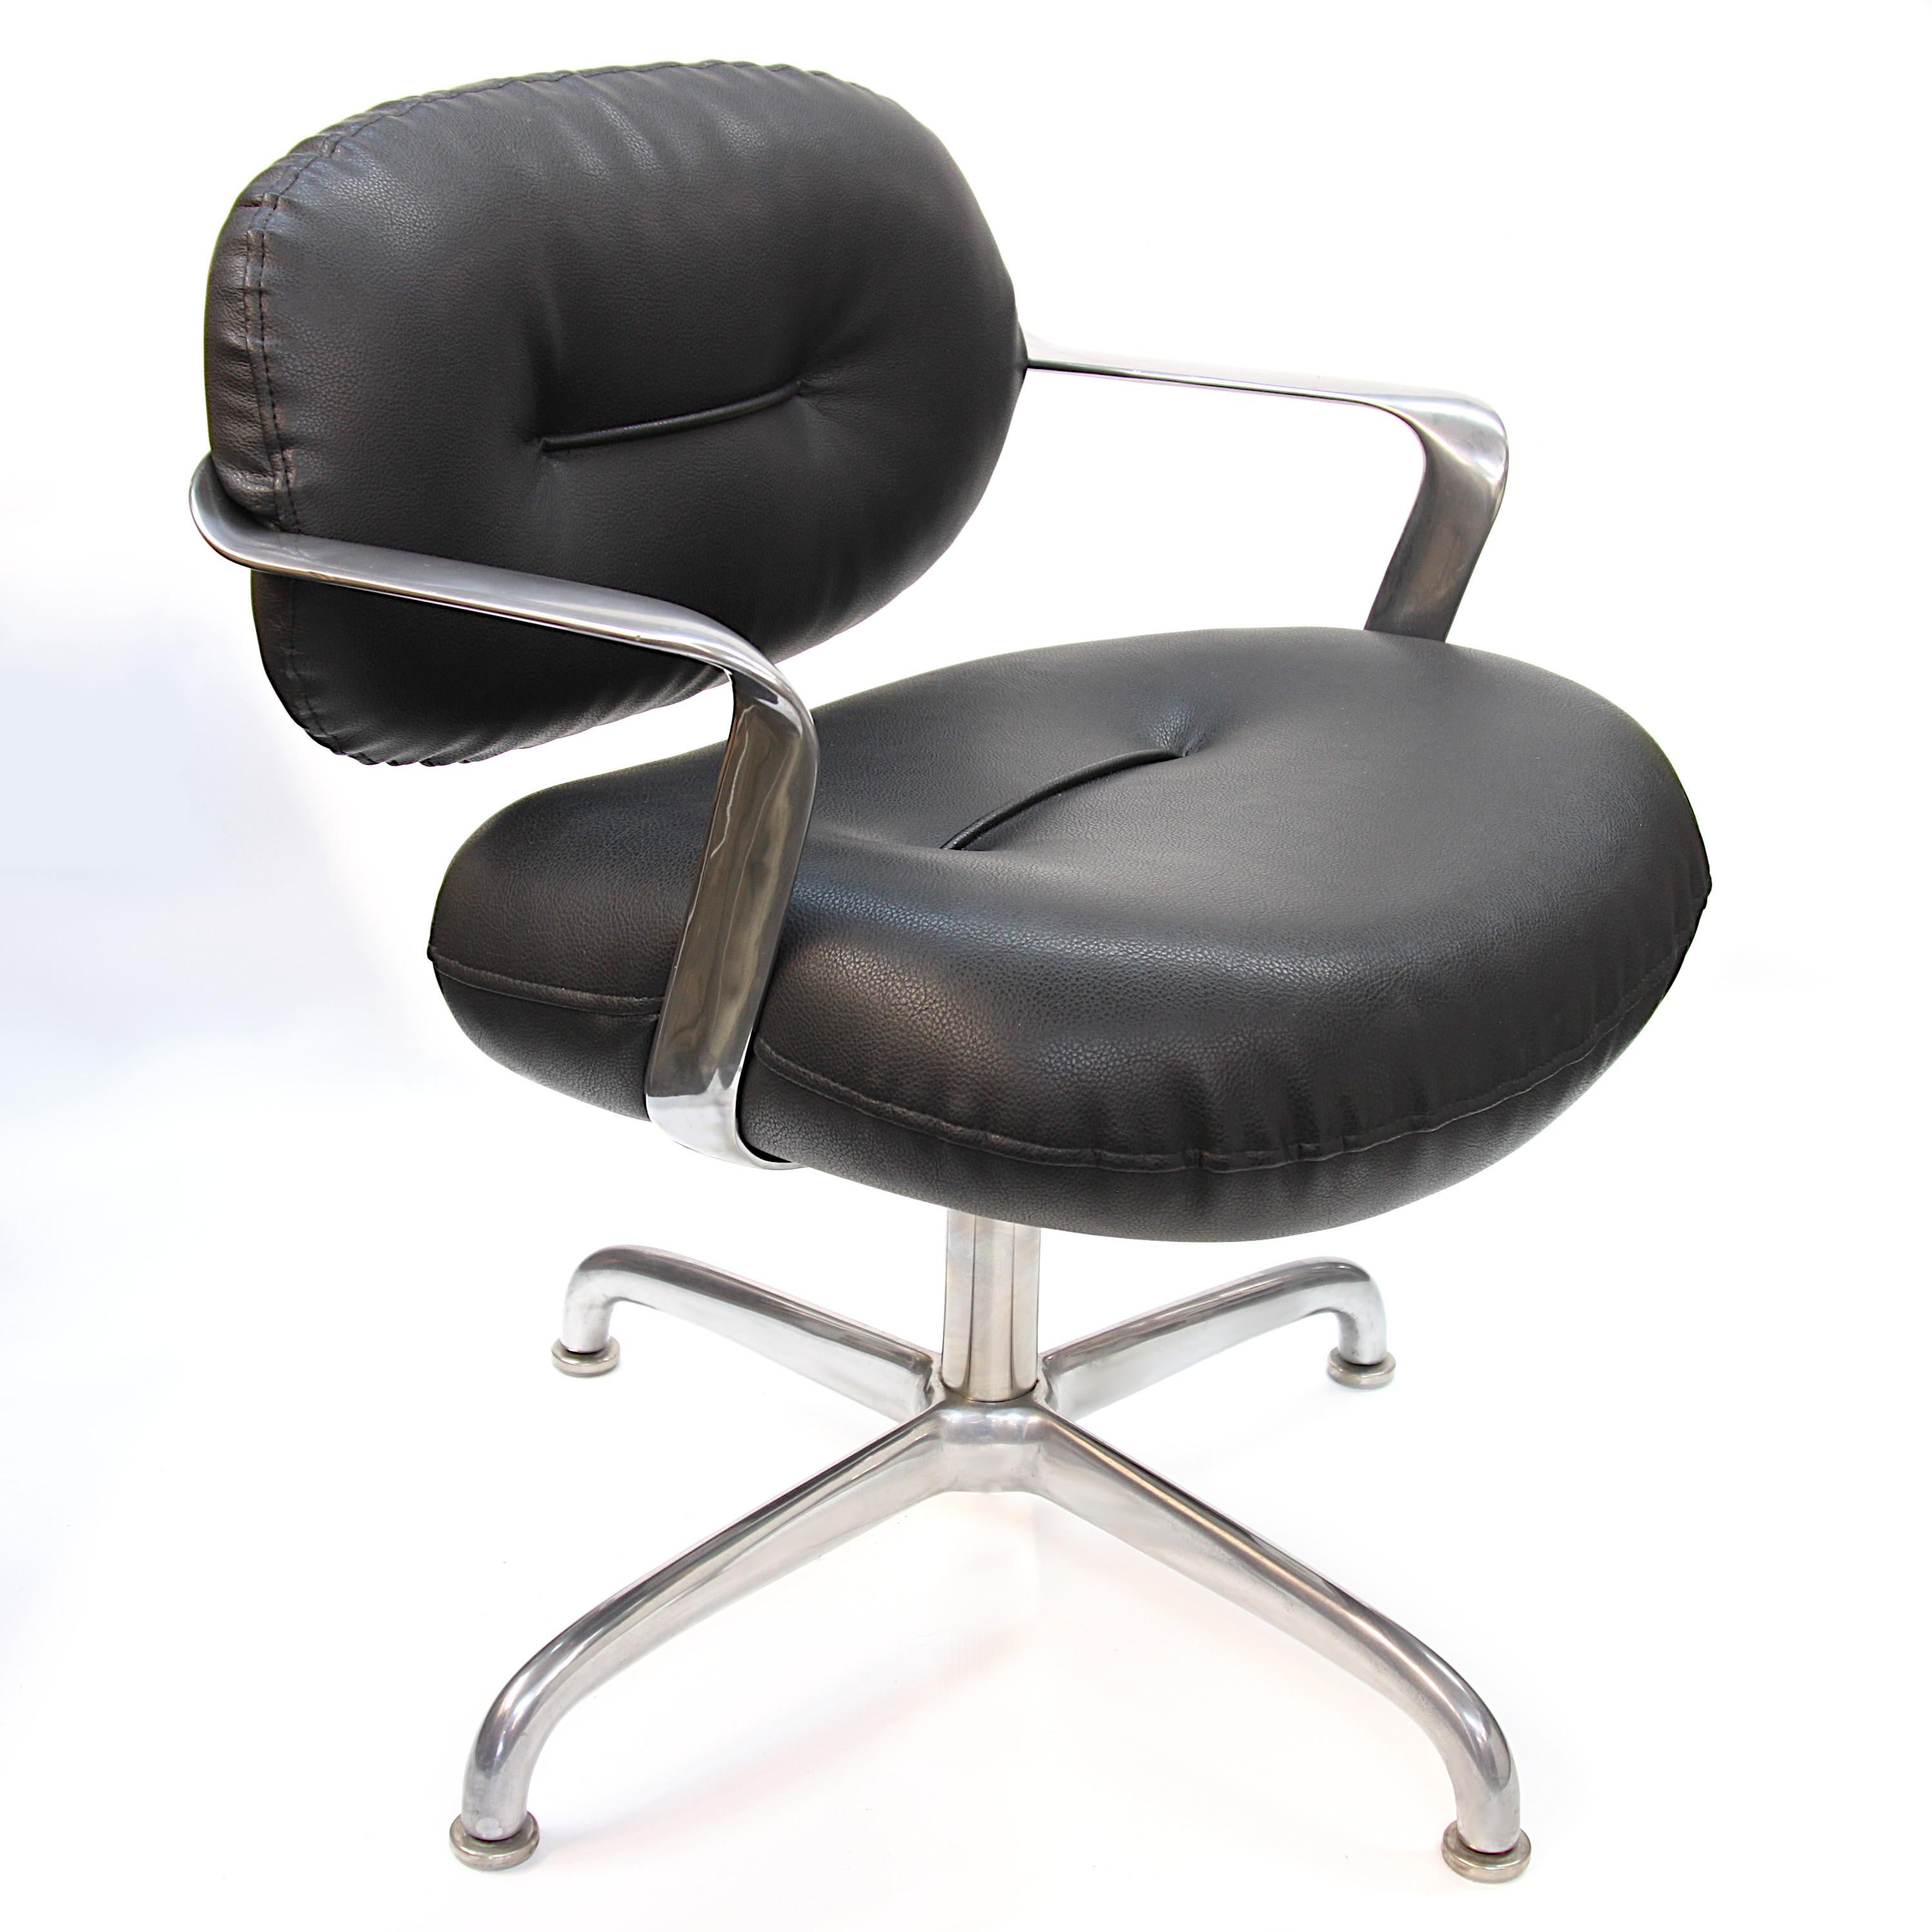 Arguably one of the most elegant desk chair designs from the midcentury era, this Morrison/Hannah design for Knoll Studios is utilitarian sculpture at its best. Chair features a curvaceous, cast-aluminum frame, black leather tufted cushions, and